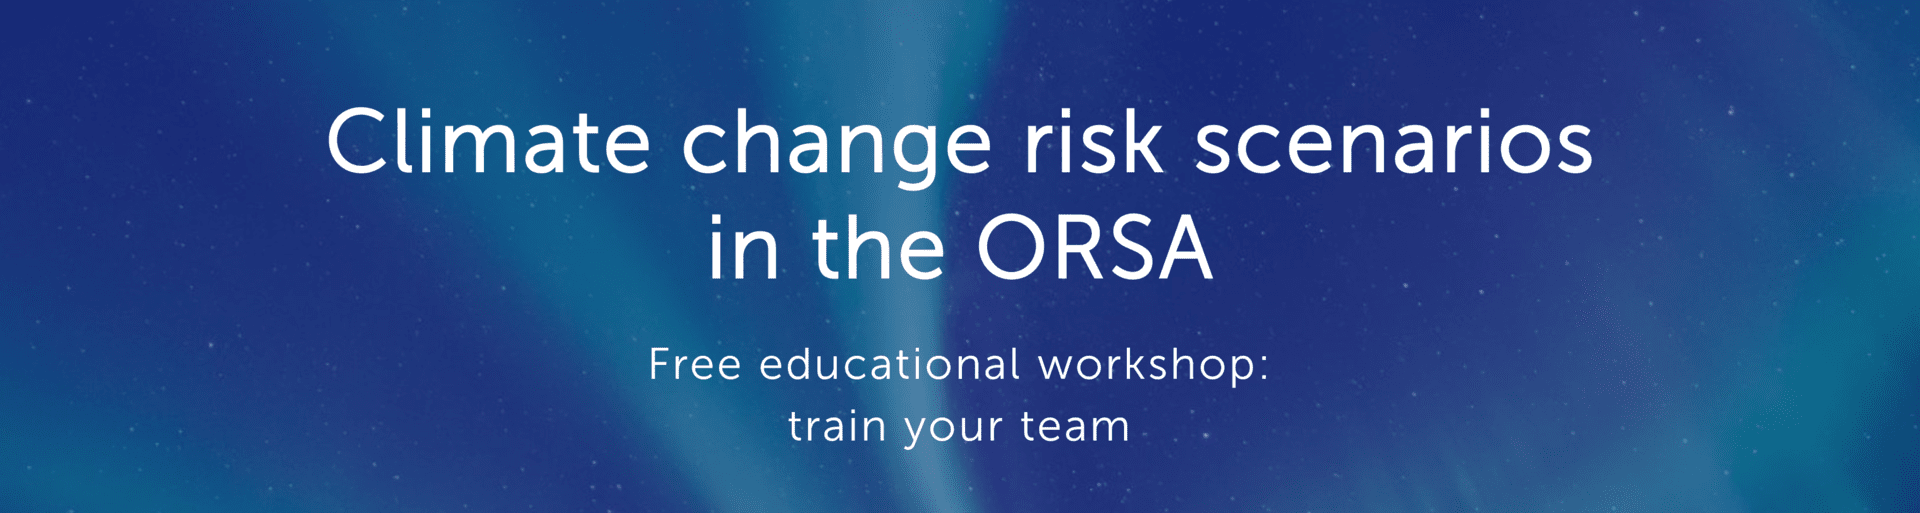 Climate change risk scenarios in the ORSA - free educational workshop by Finalyse